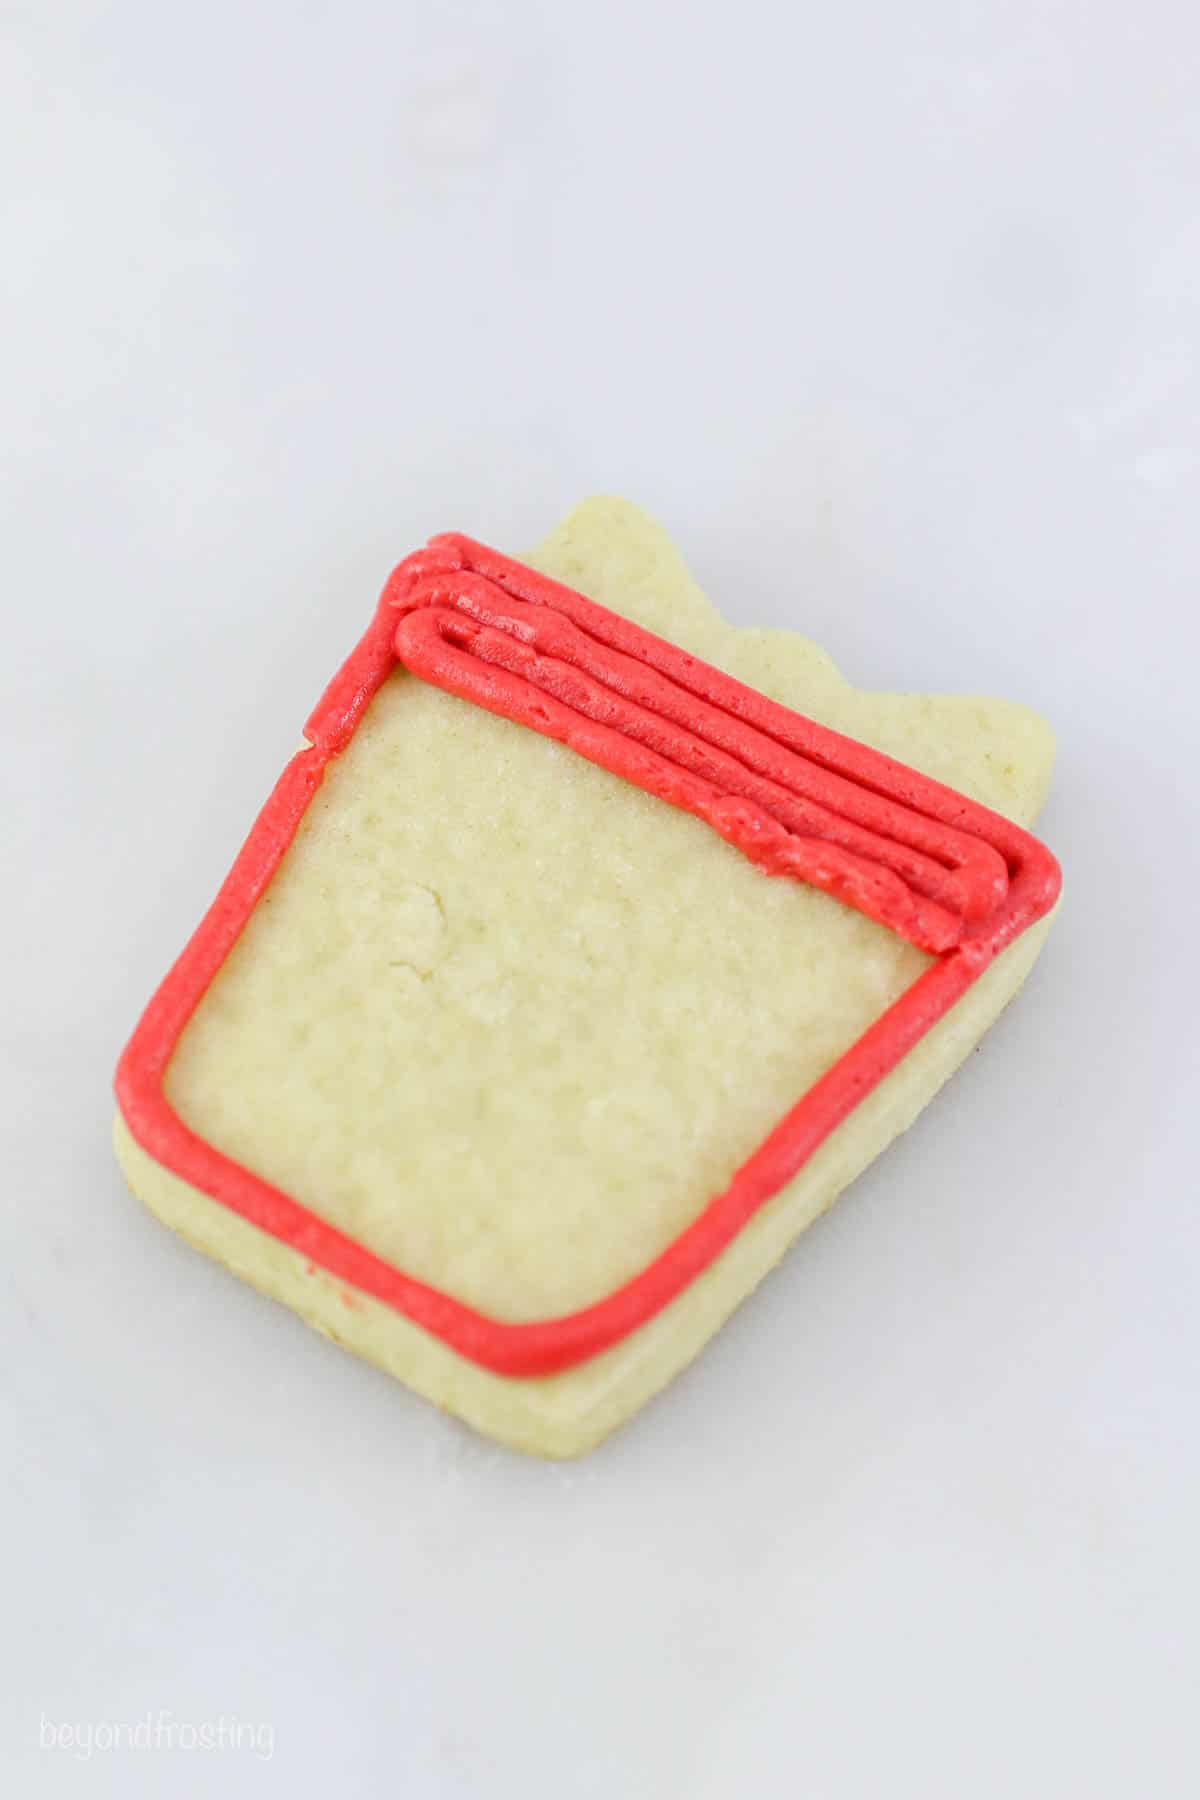 Red frosting filling in a square on a sugar cookie